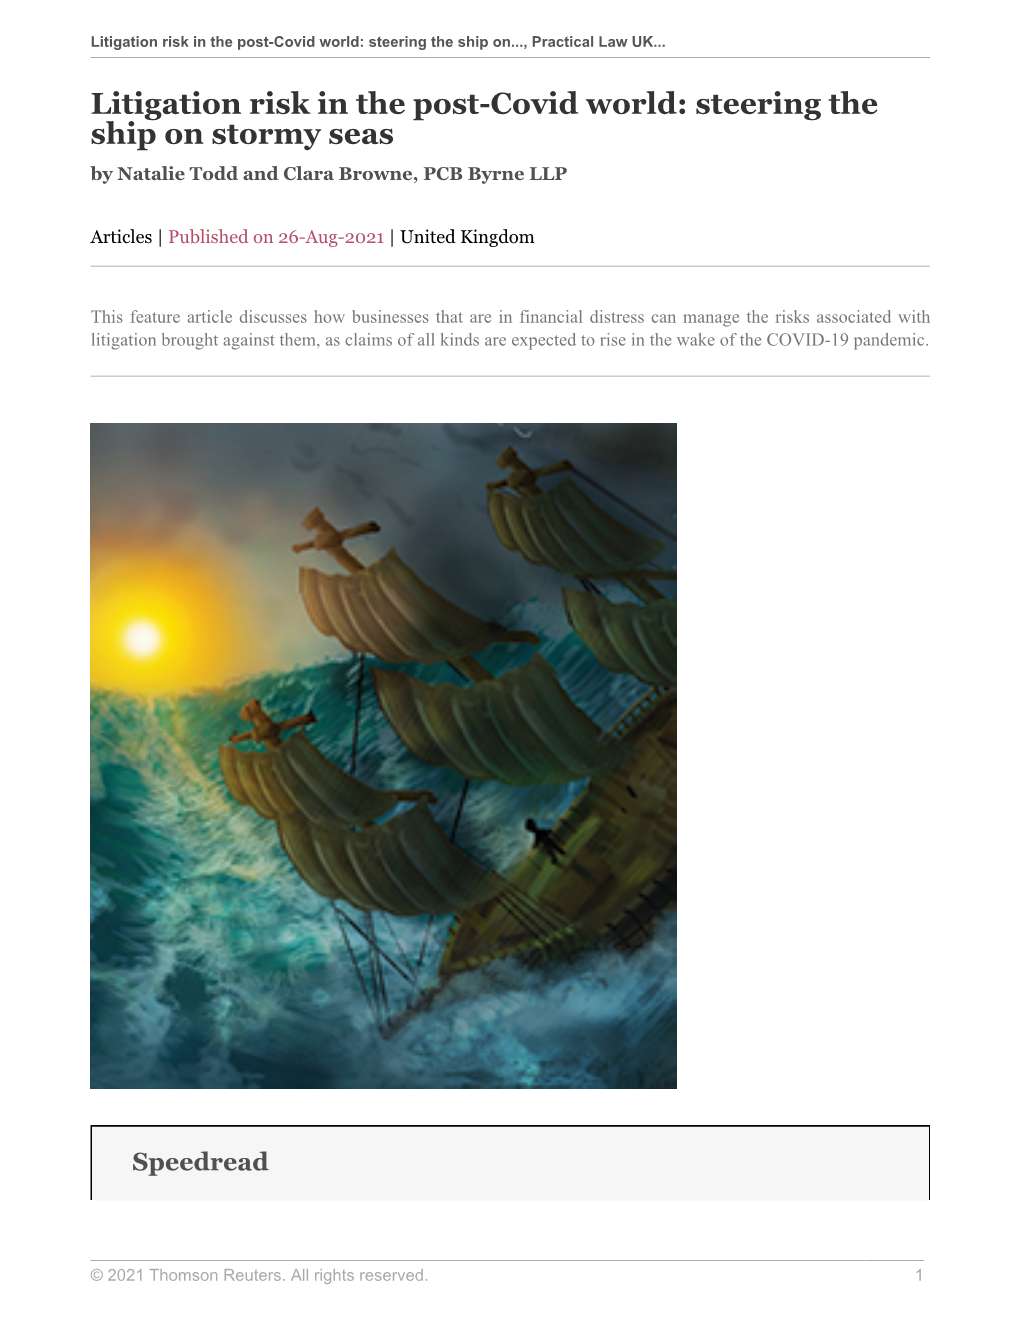 Litigation Risk in the Post-Covid World: Steering the Ship on Stormy Seas by Natalie Todd and Clara Browne, PCB Byrne LLP